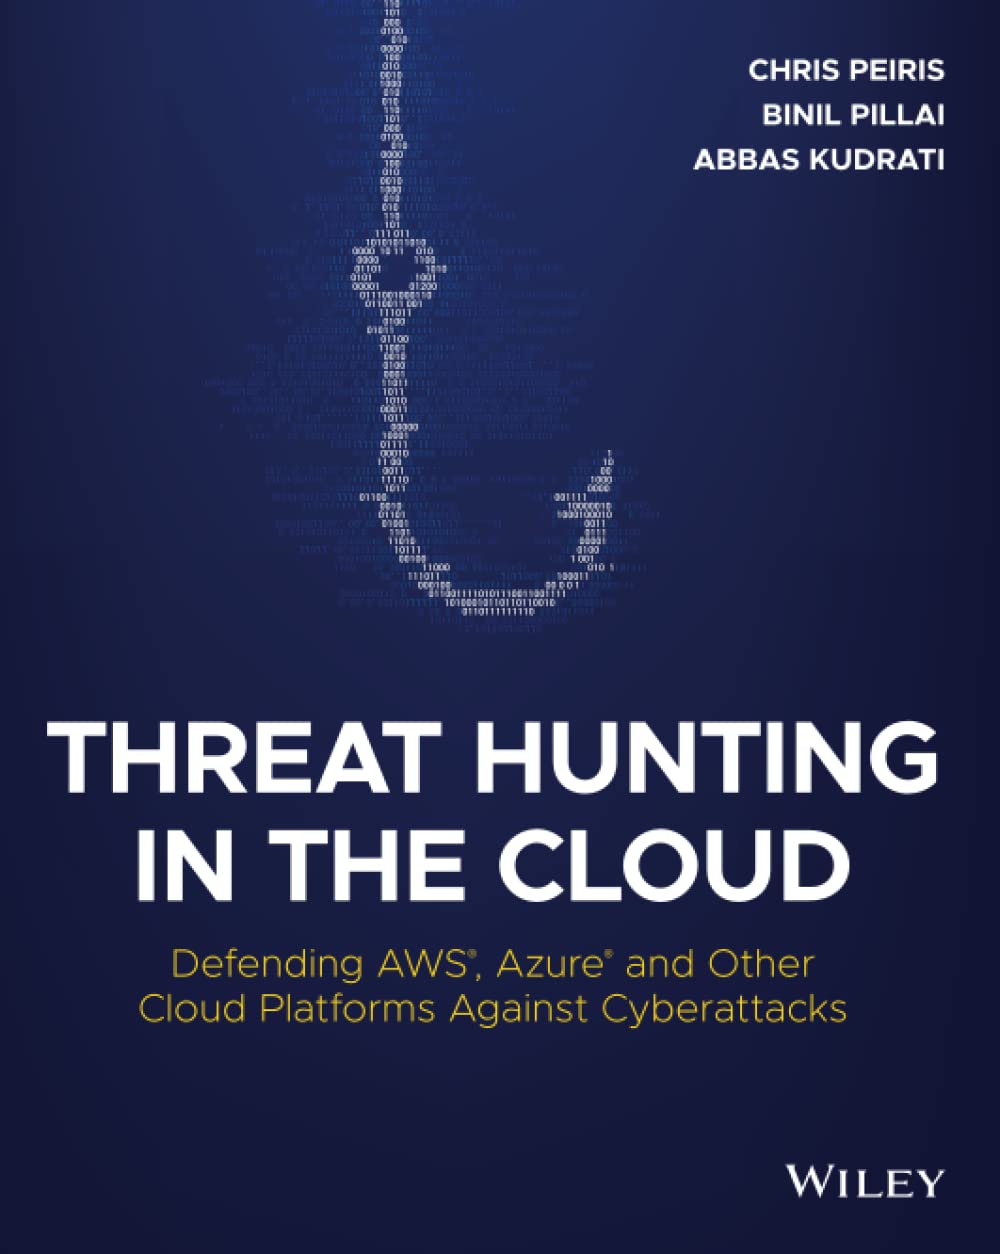 Threat Hunting in the Cloud: Defending Aws, Azure and Other Cloud Platforms Against Cyberattacks (Paperback)